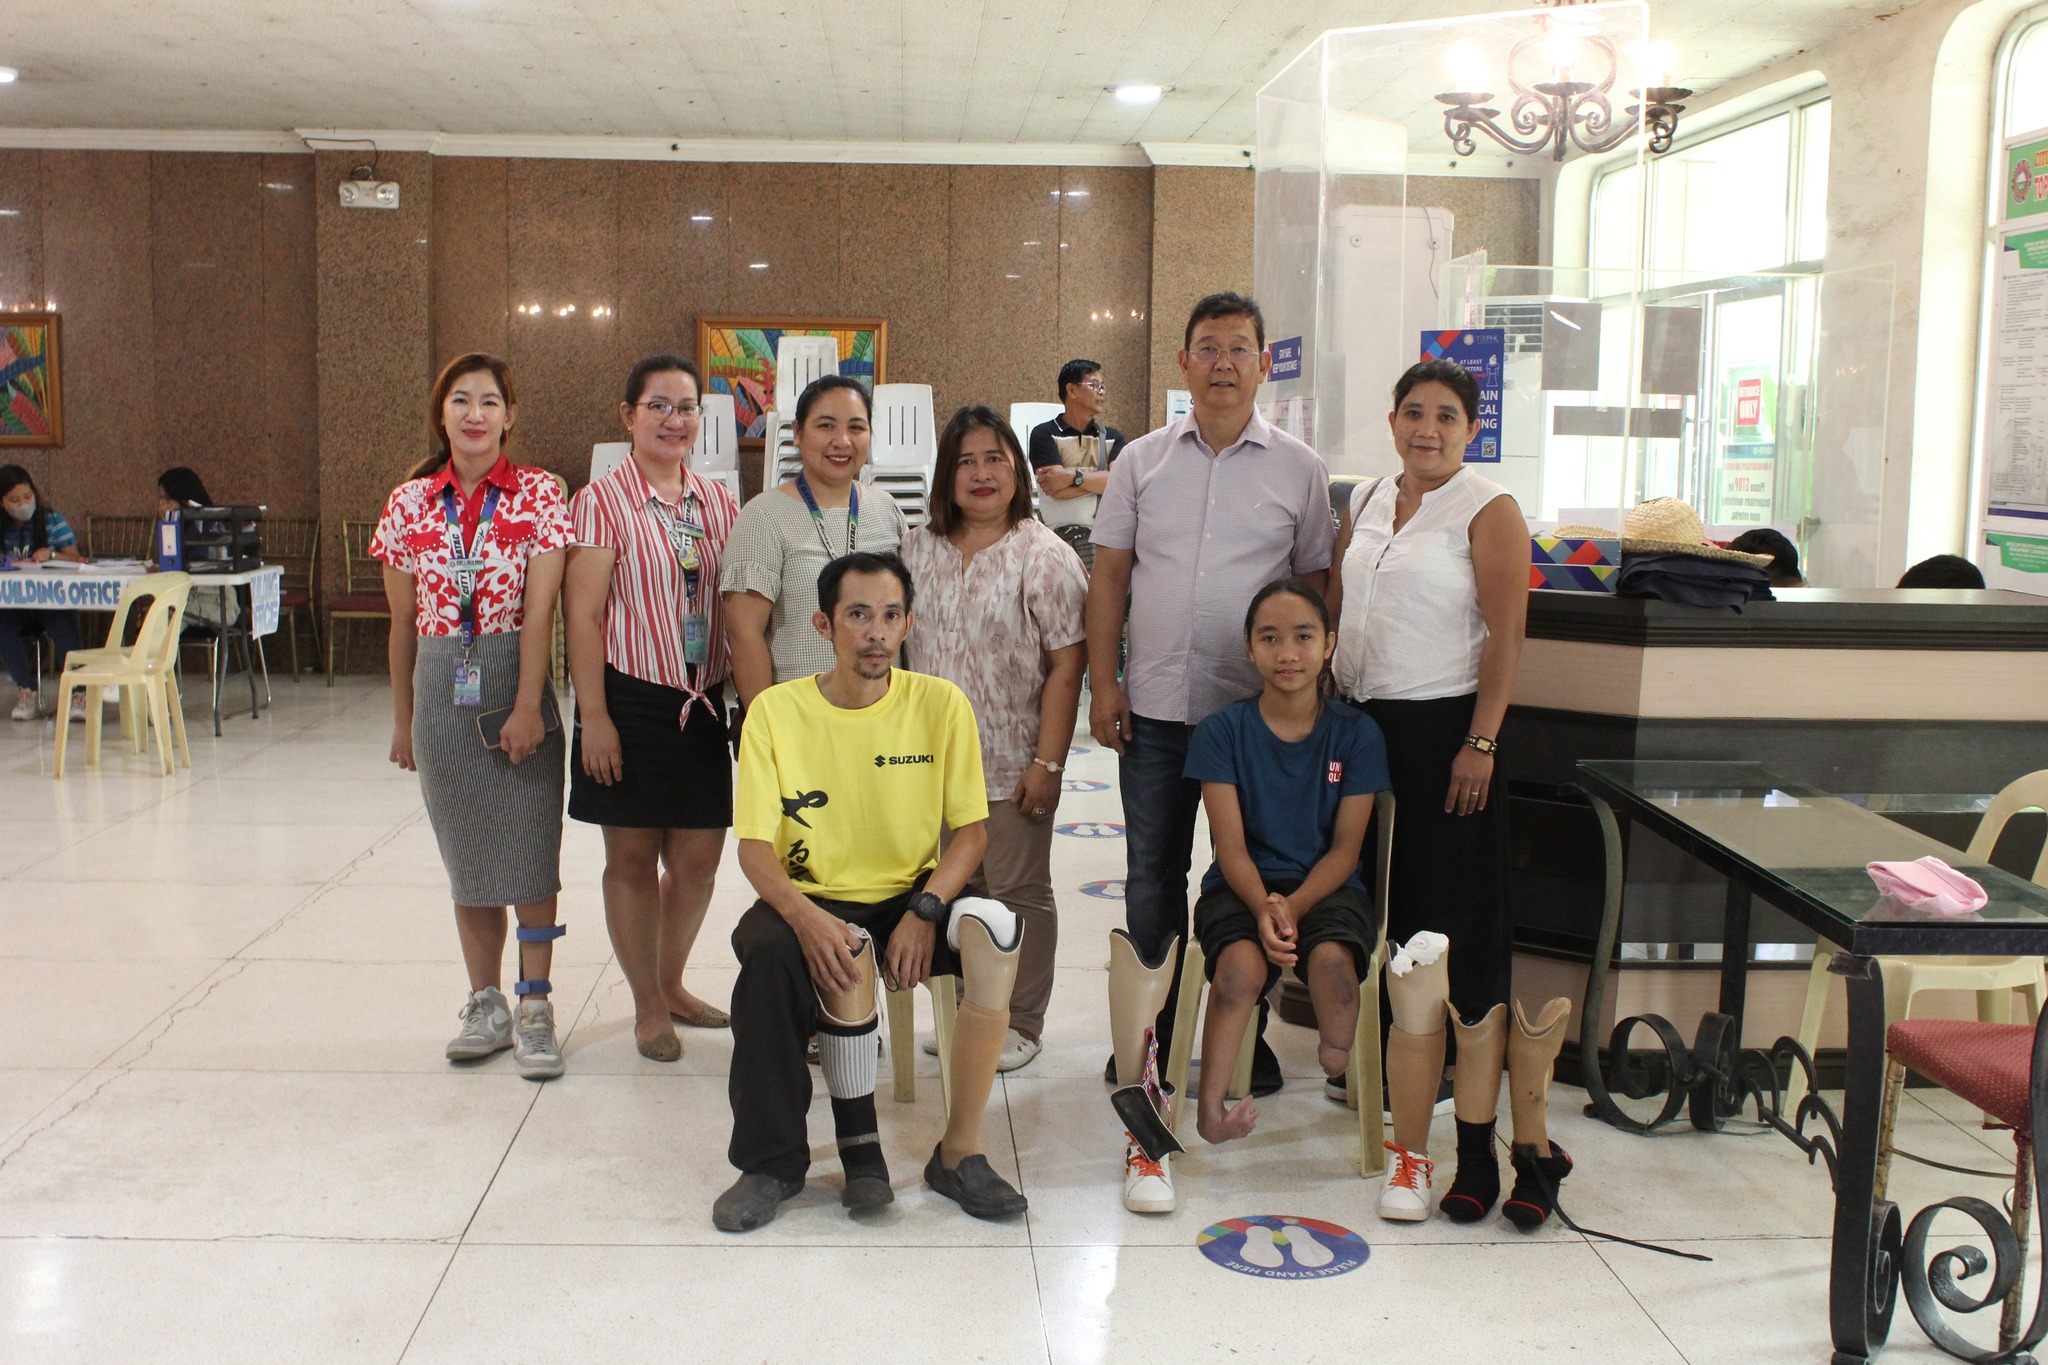 CITY GOVERNMENT OF BATAC PROVIDES FREE PROSTHETIC LEGS TO HANDICAPPED BENEFICIARIES